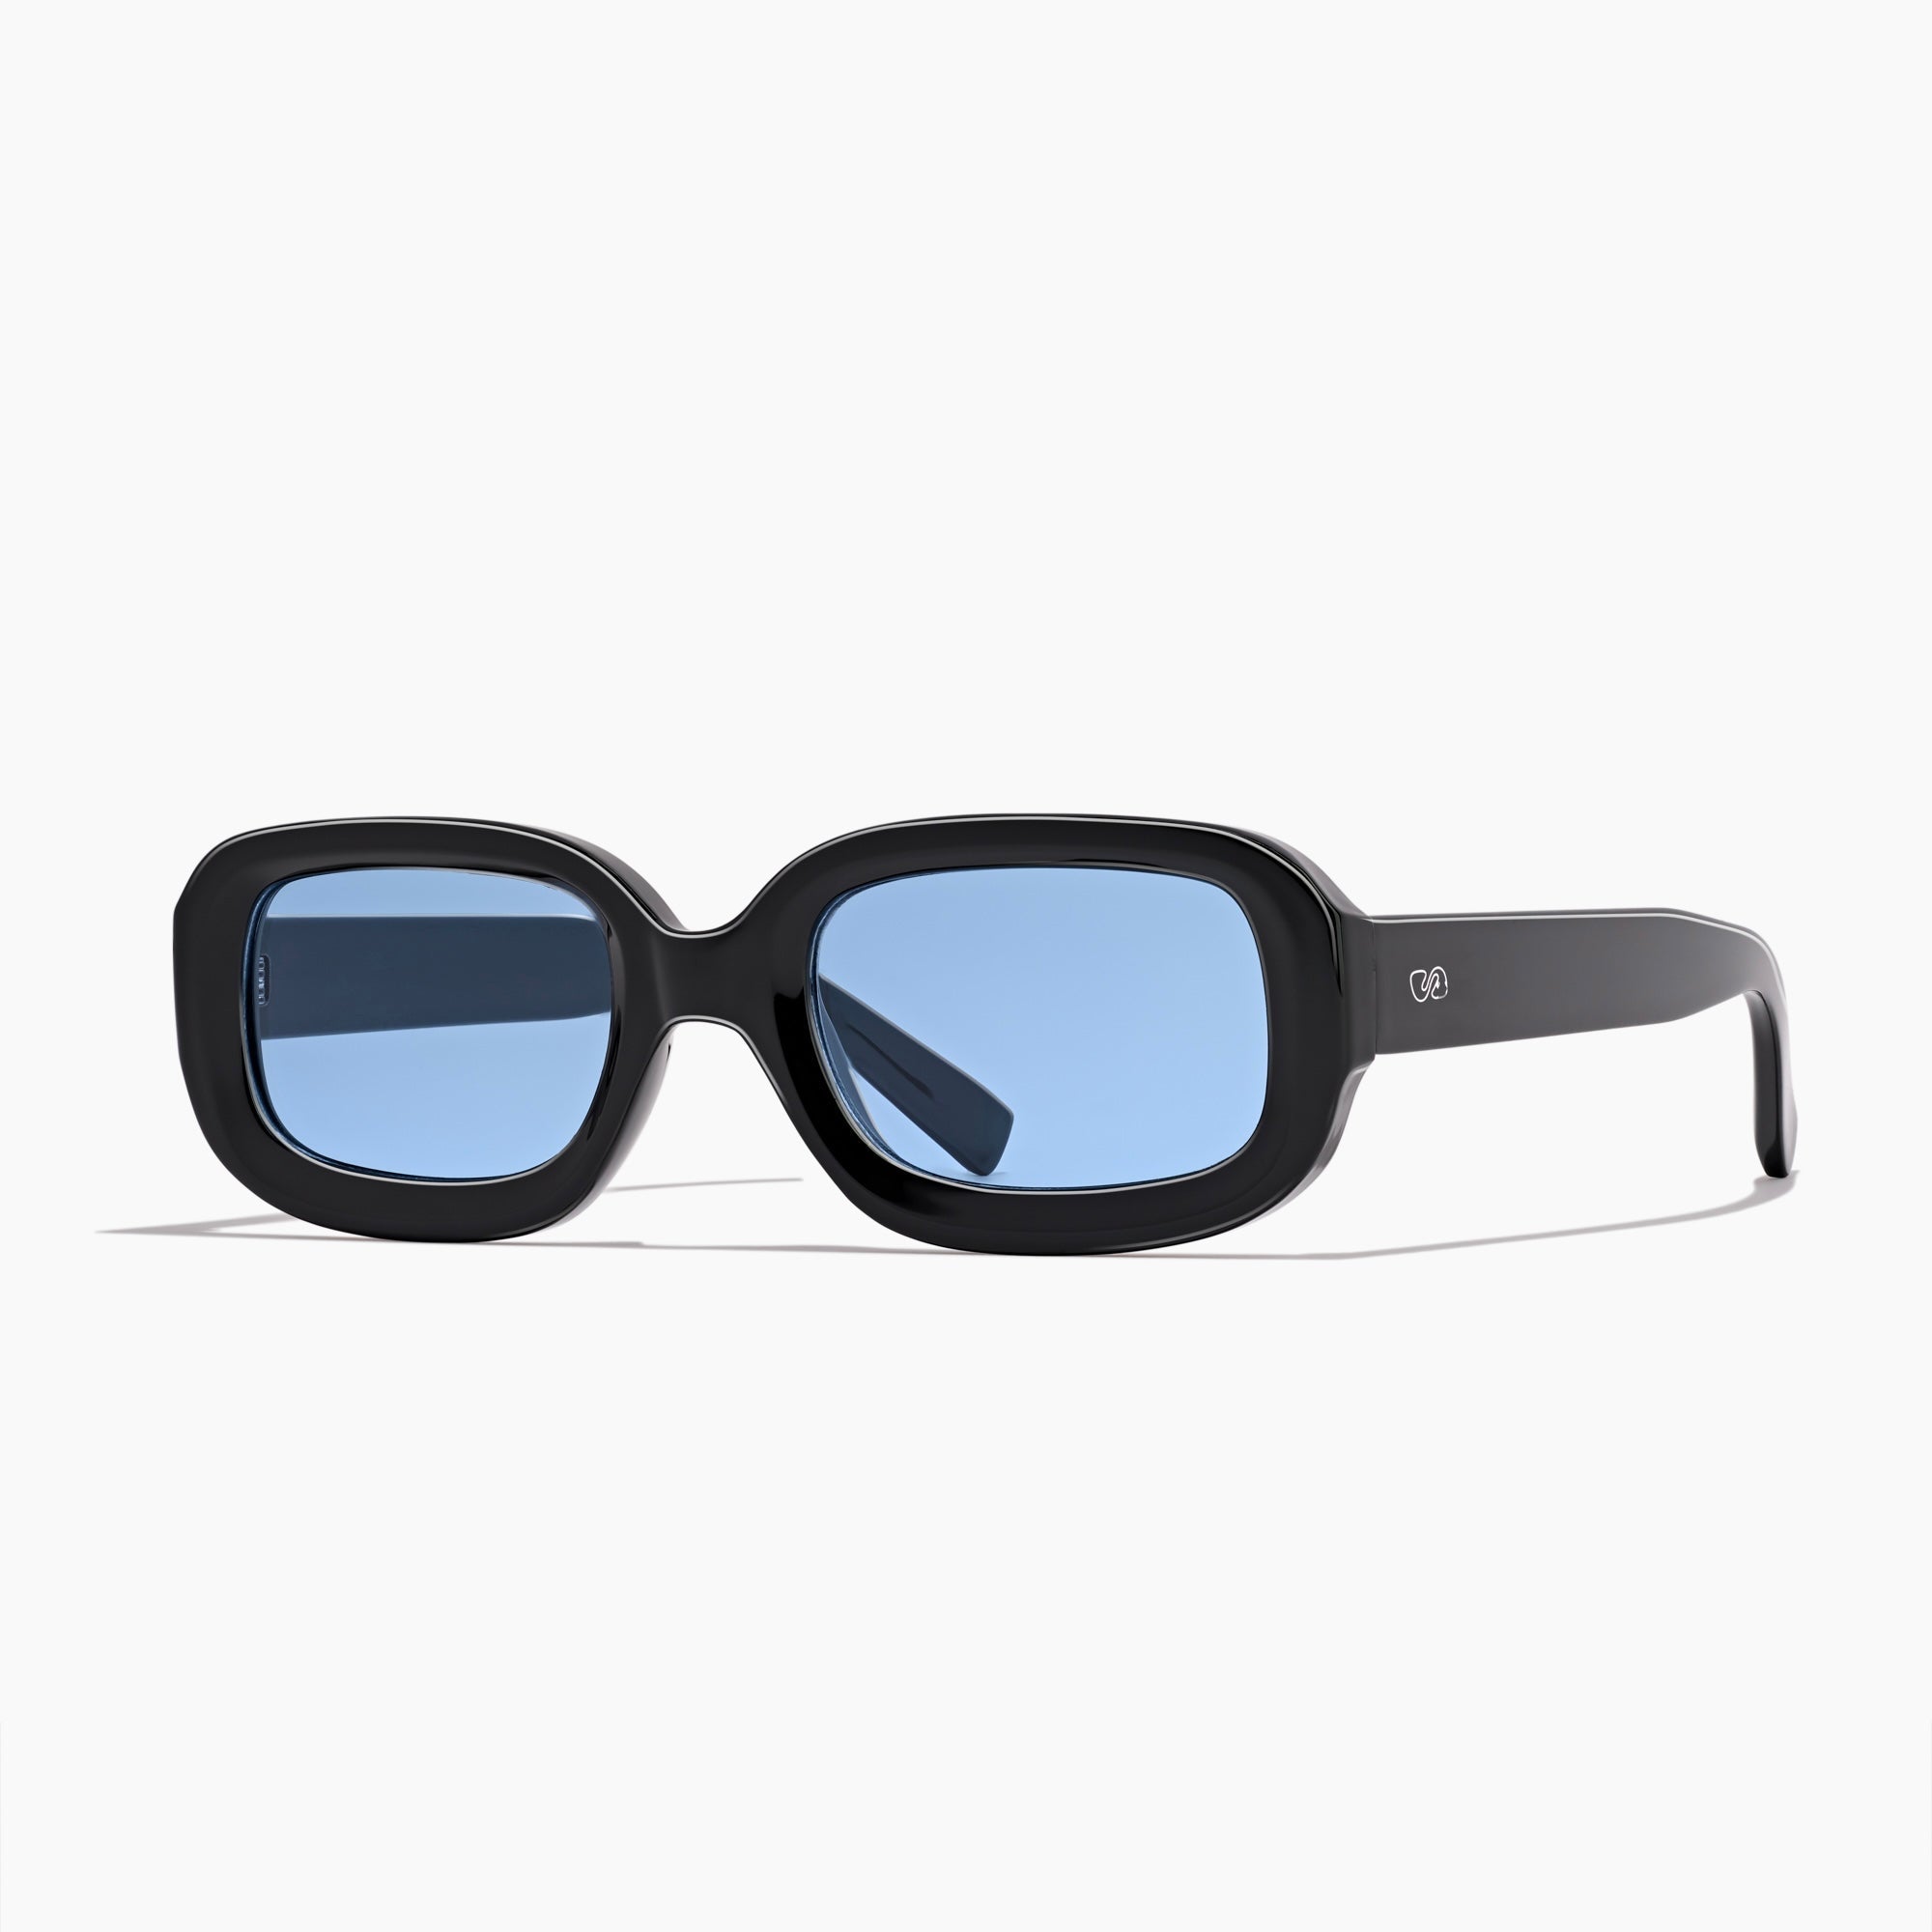 SOHO Sunglasses in black and prussian